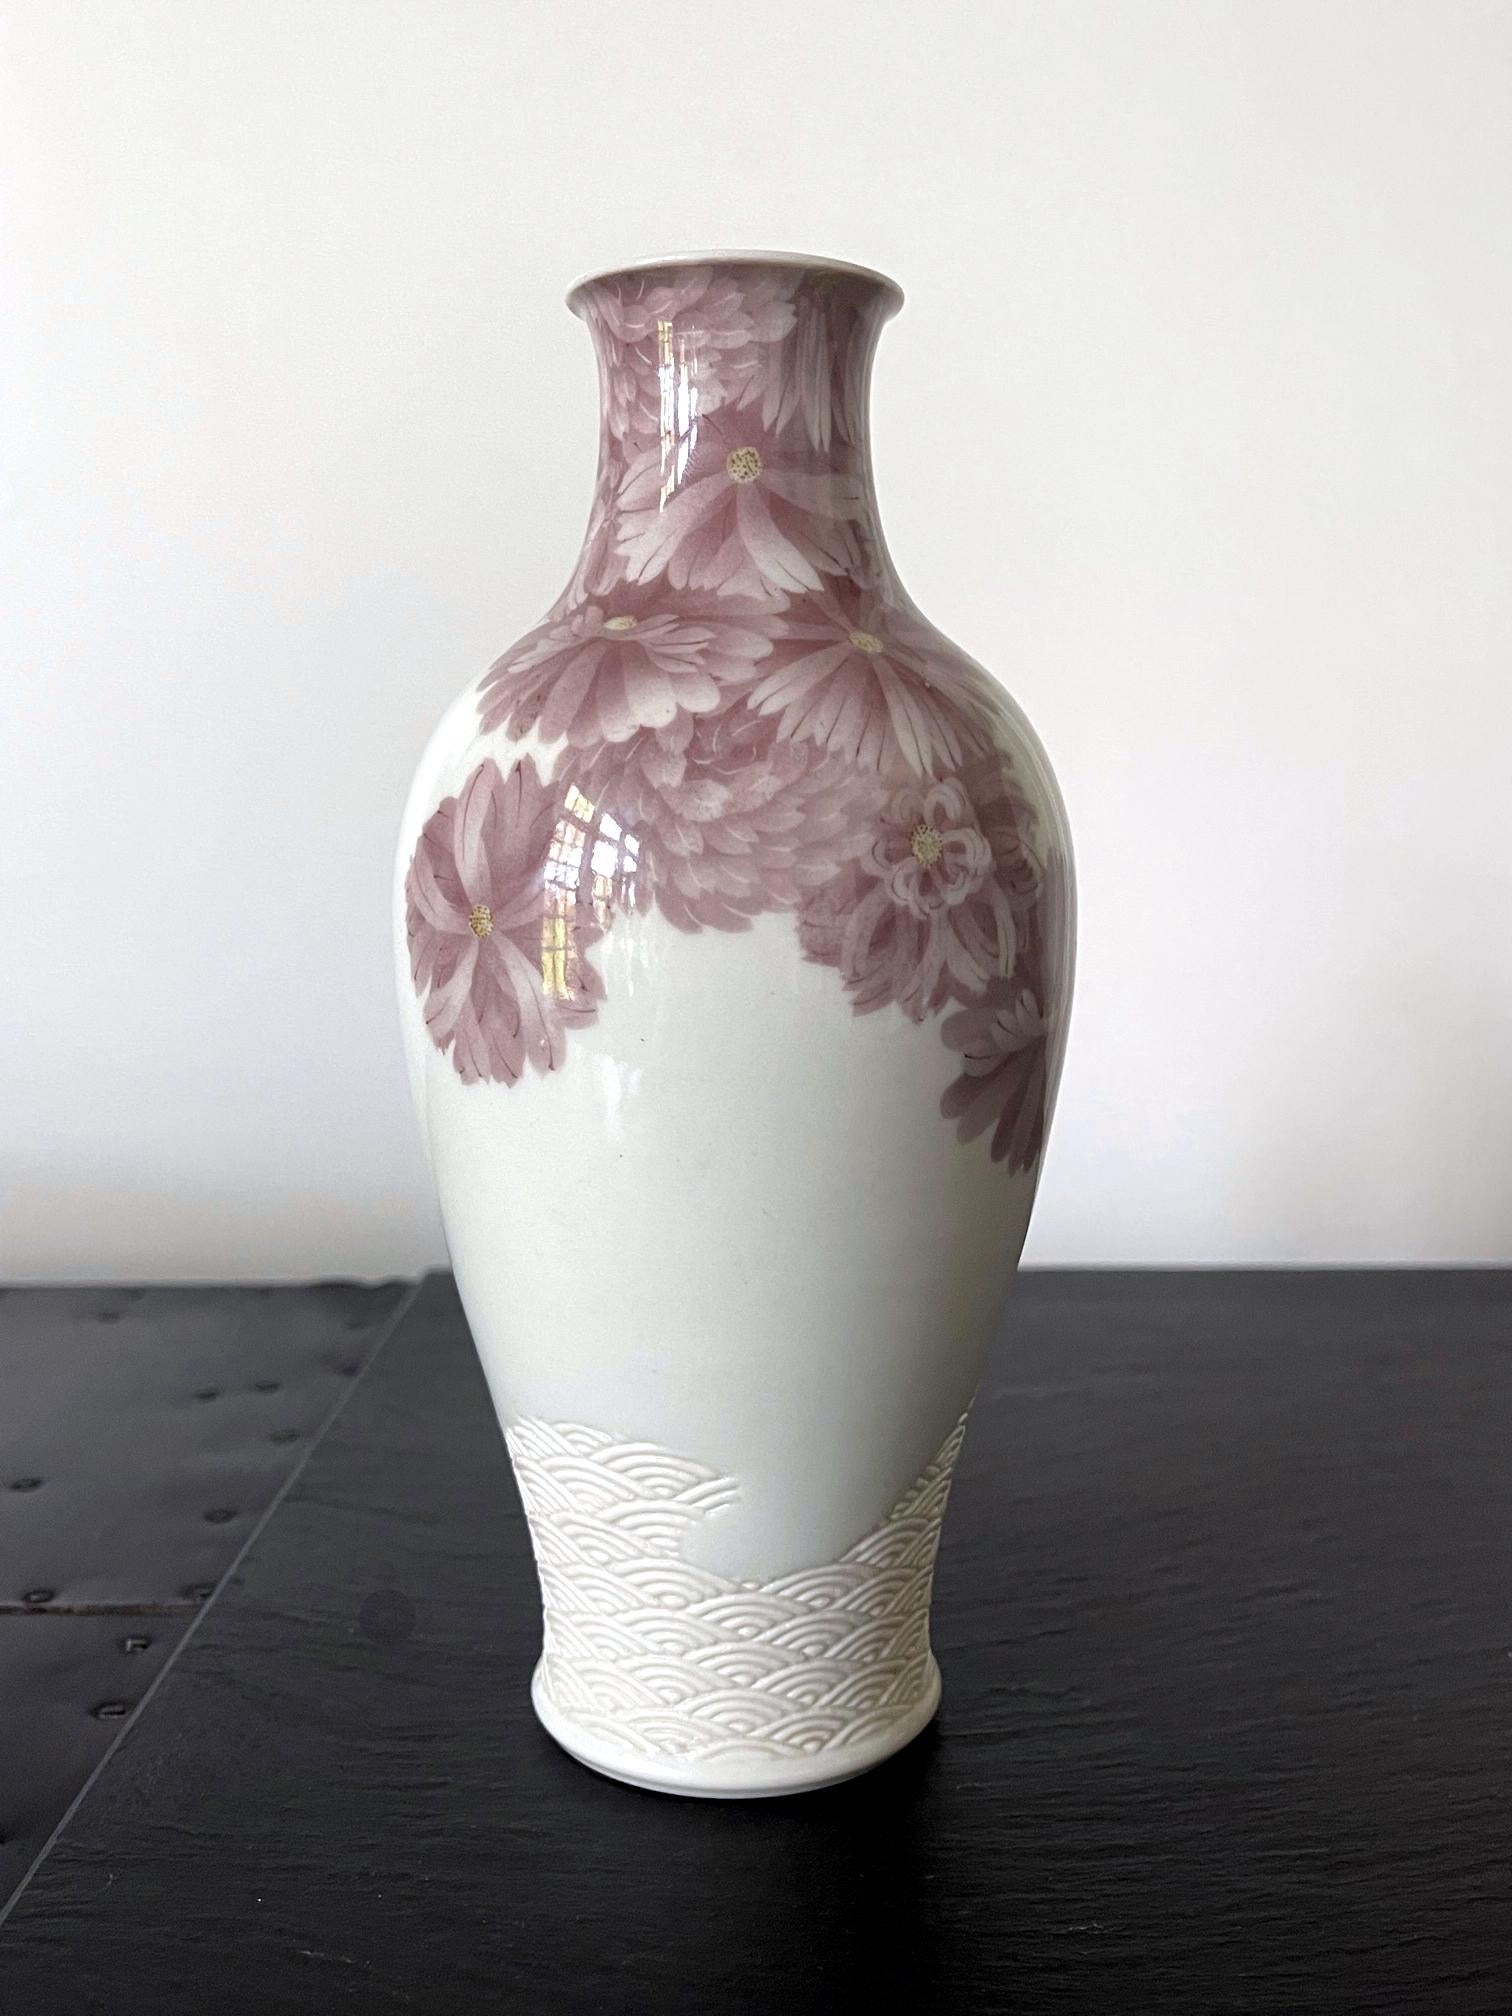 Late 19th Century Japanese Ceramic Vase with Delicate Carvings by Makuzu Kozan Meiji Period For Sale